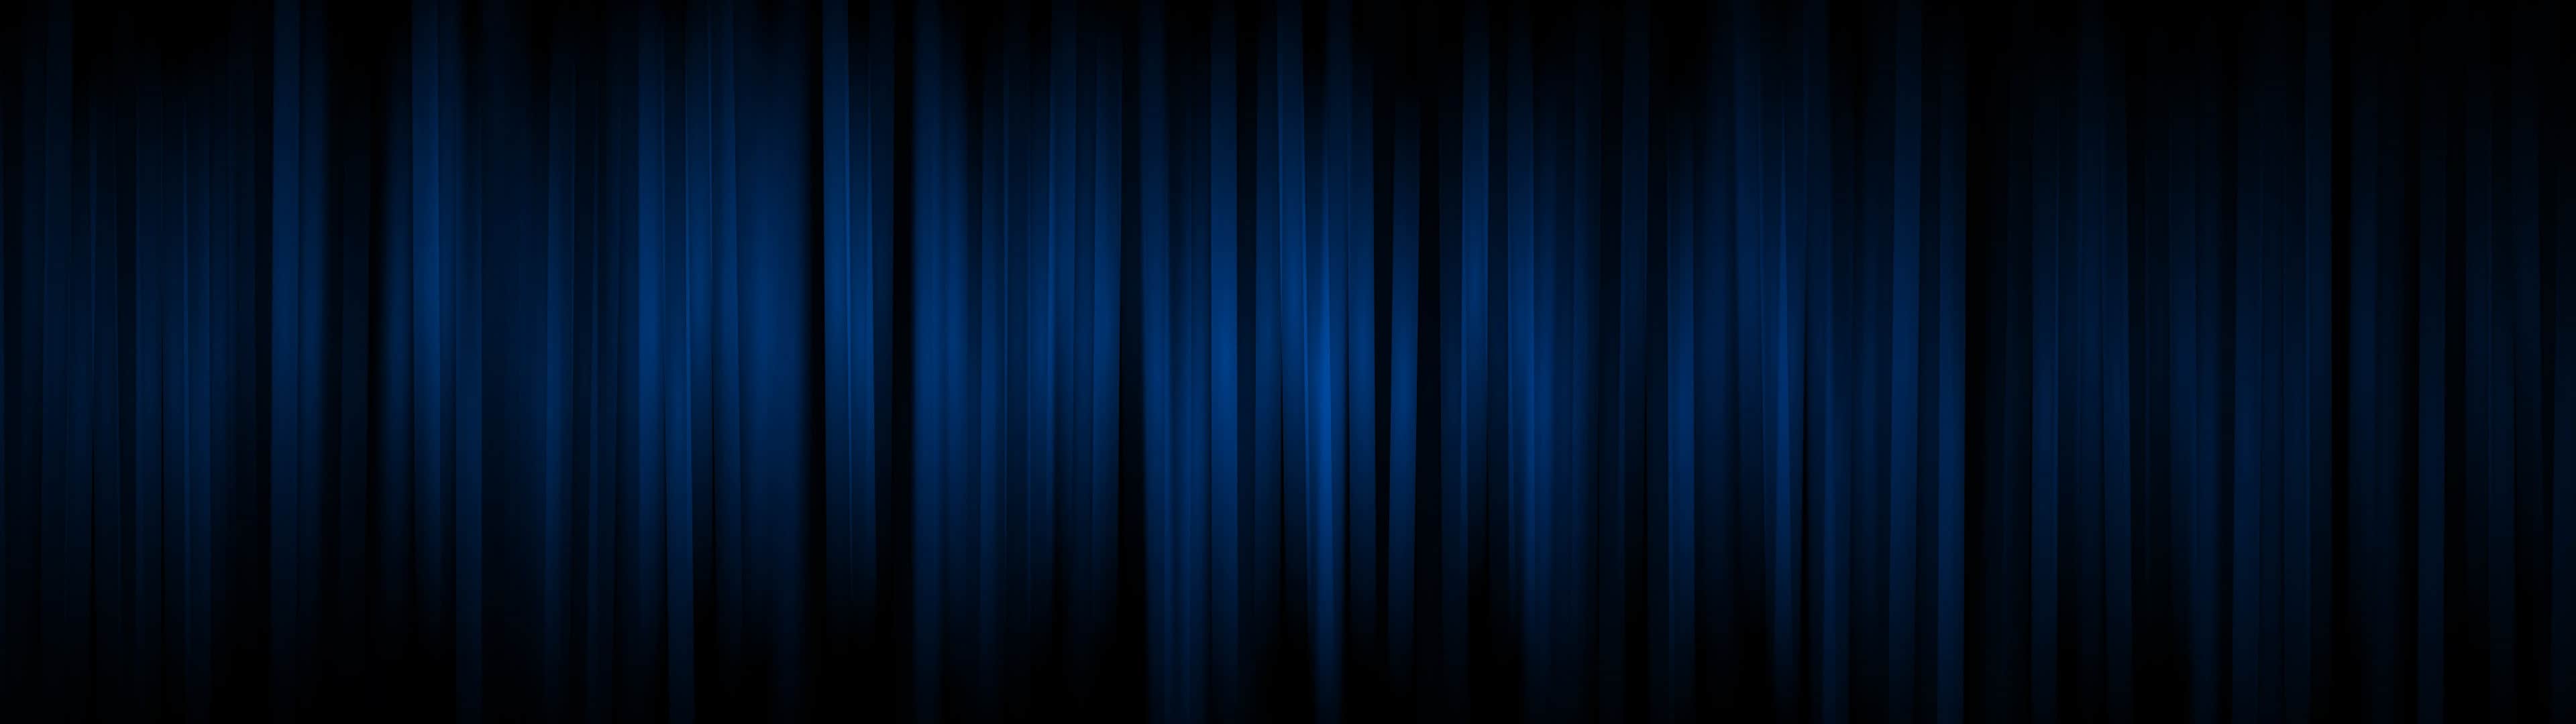 Blue Dual Monitor Wallpapers